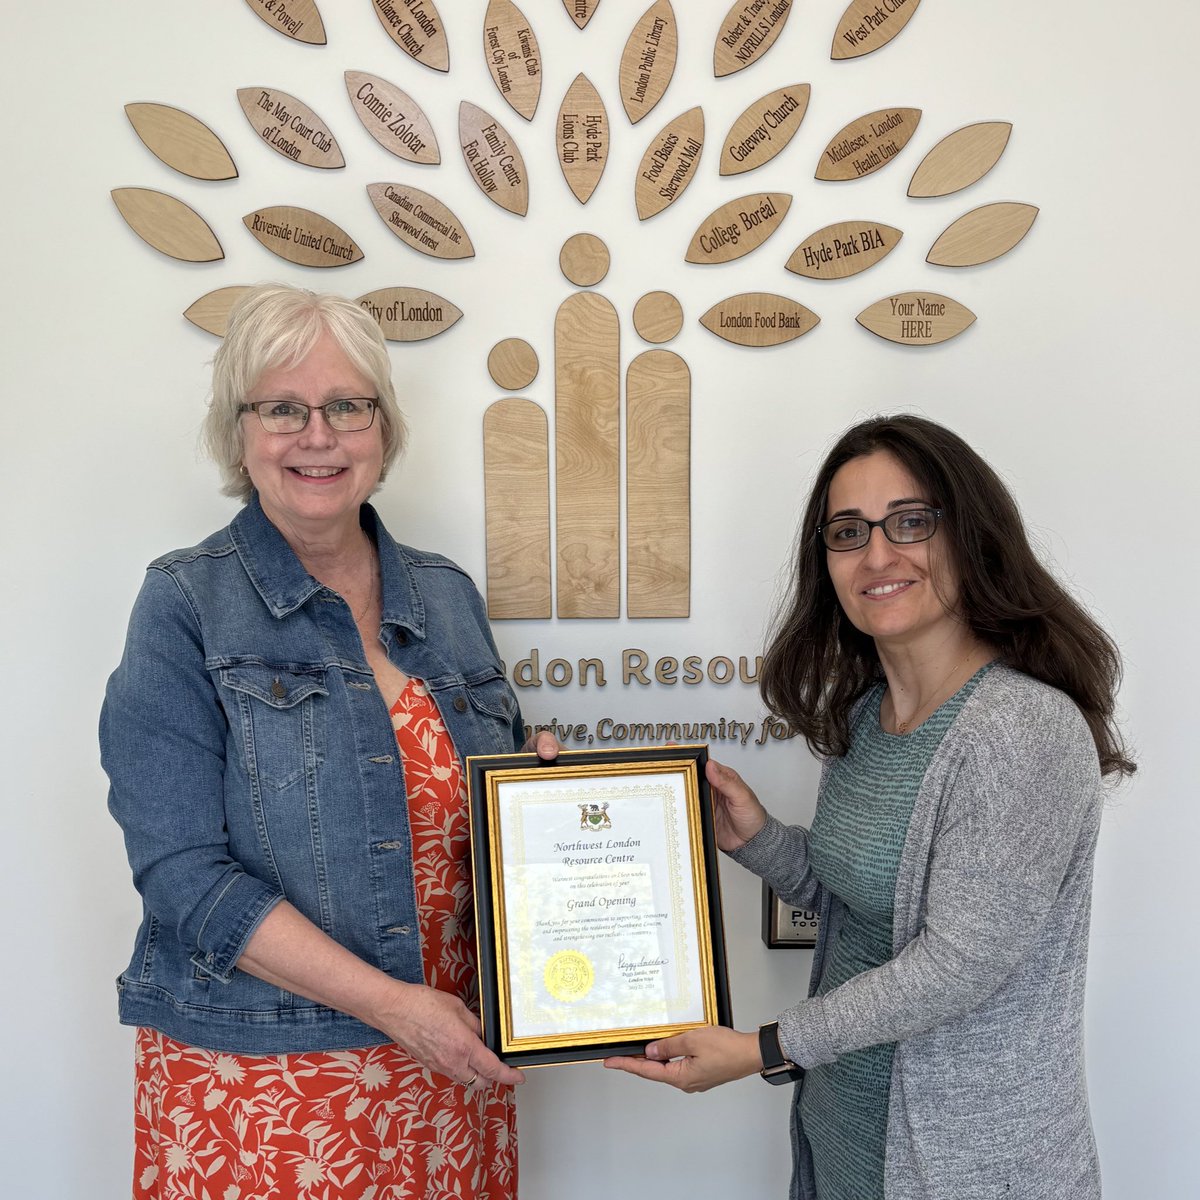 Thanks to the generosity of Londoners, I delivered donations from my LWLG event to the @NWLRC & presented a Grand Opening scroll. The new location offers incredible opportunities to support, connect, & empower residents of NW #LdnOnt, and an expanded food bank. Congrats to NWLRC!